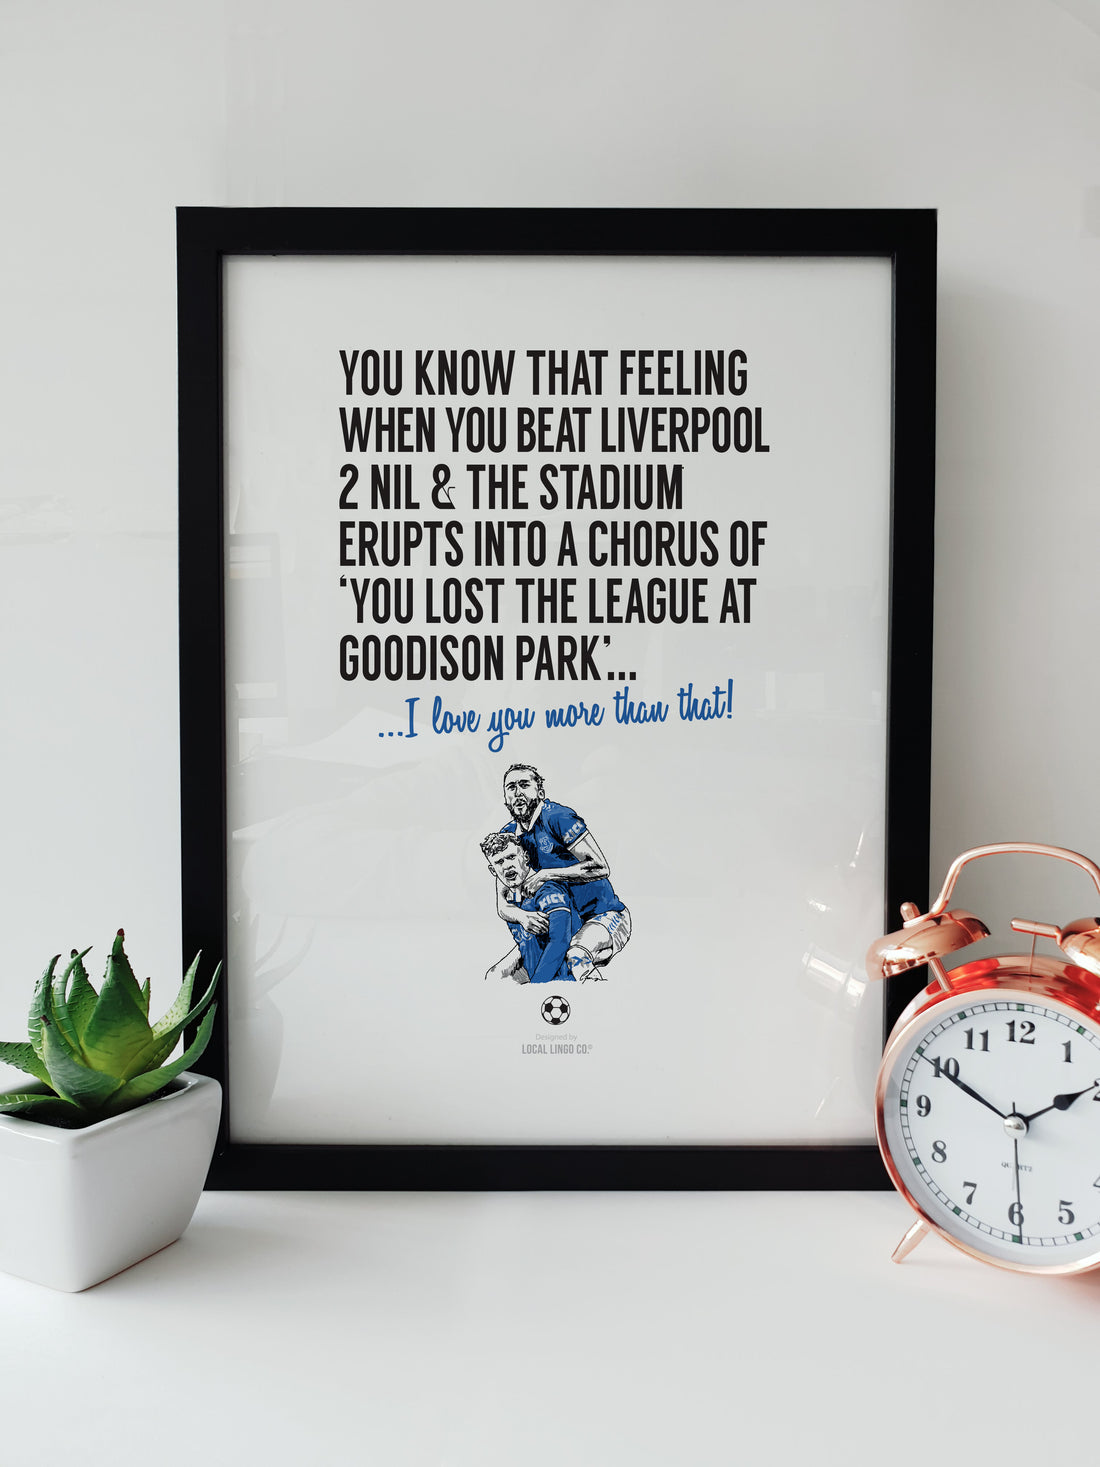 You Lost the League at Goodison Park Everton Fan Chant Lyrics Artwork by Local Lingo, featuring bold text and an illustration of jubilant Everton players in a black frame.